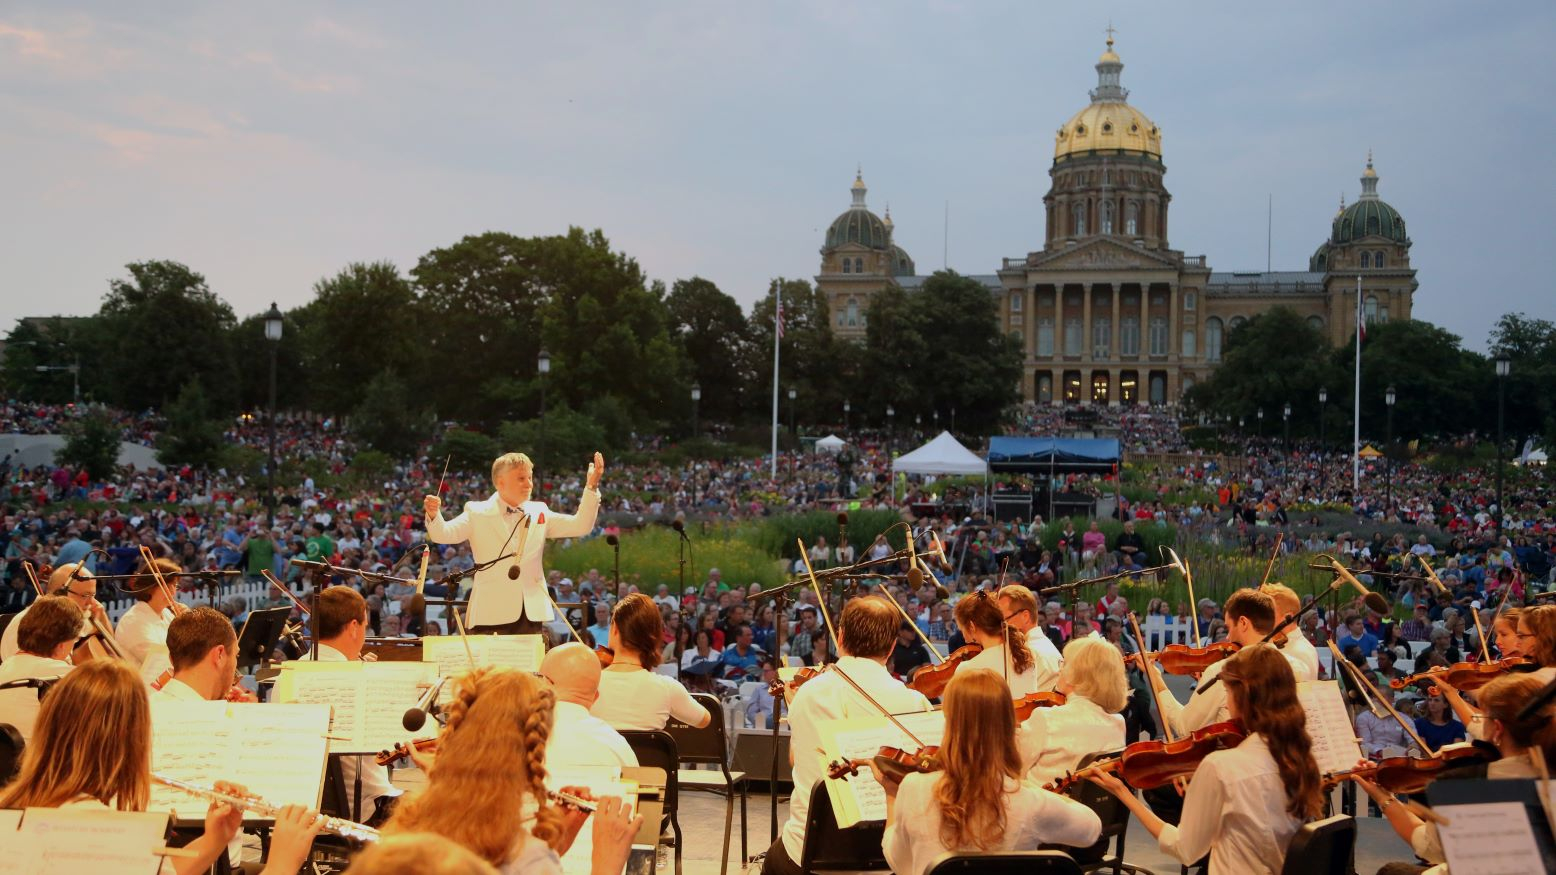 In the foreground, the Des Moines Symphony wearing white shirts plays at Yankee Doodle Pops. The Iowa Capitol and a crowd on its lawn are in the background.